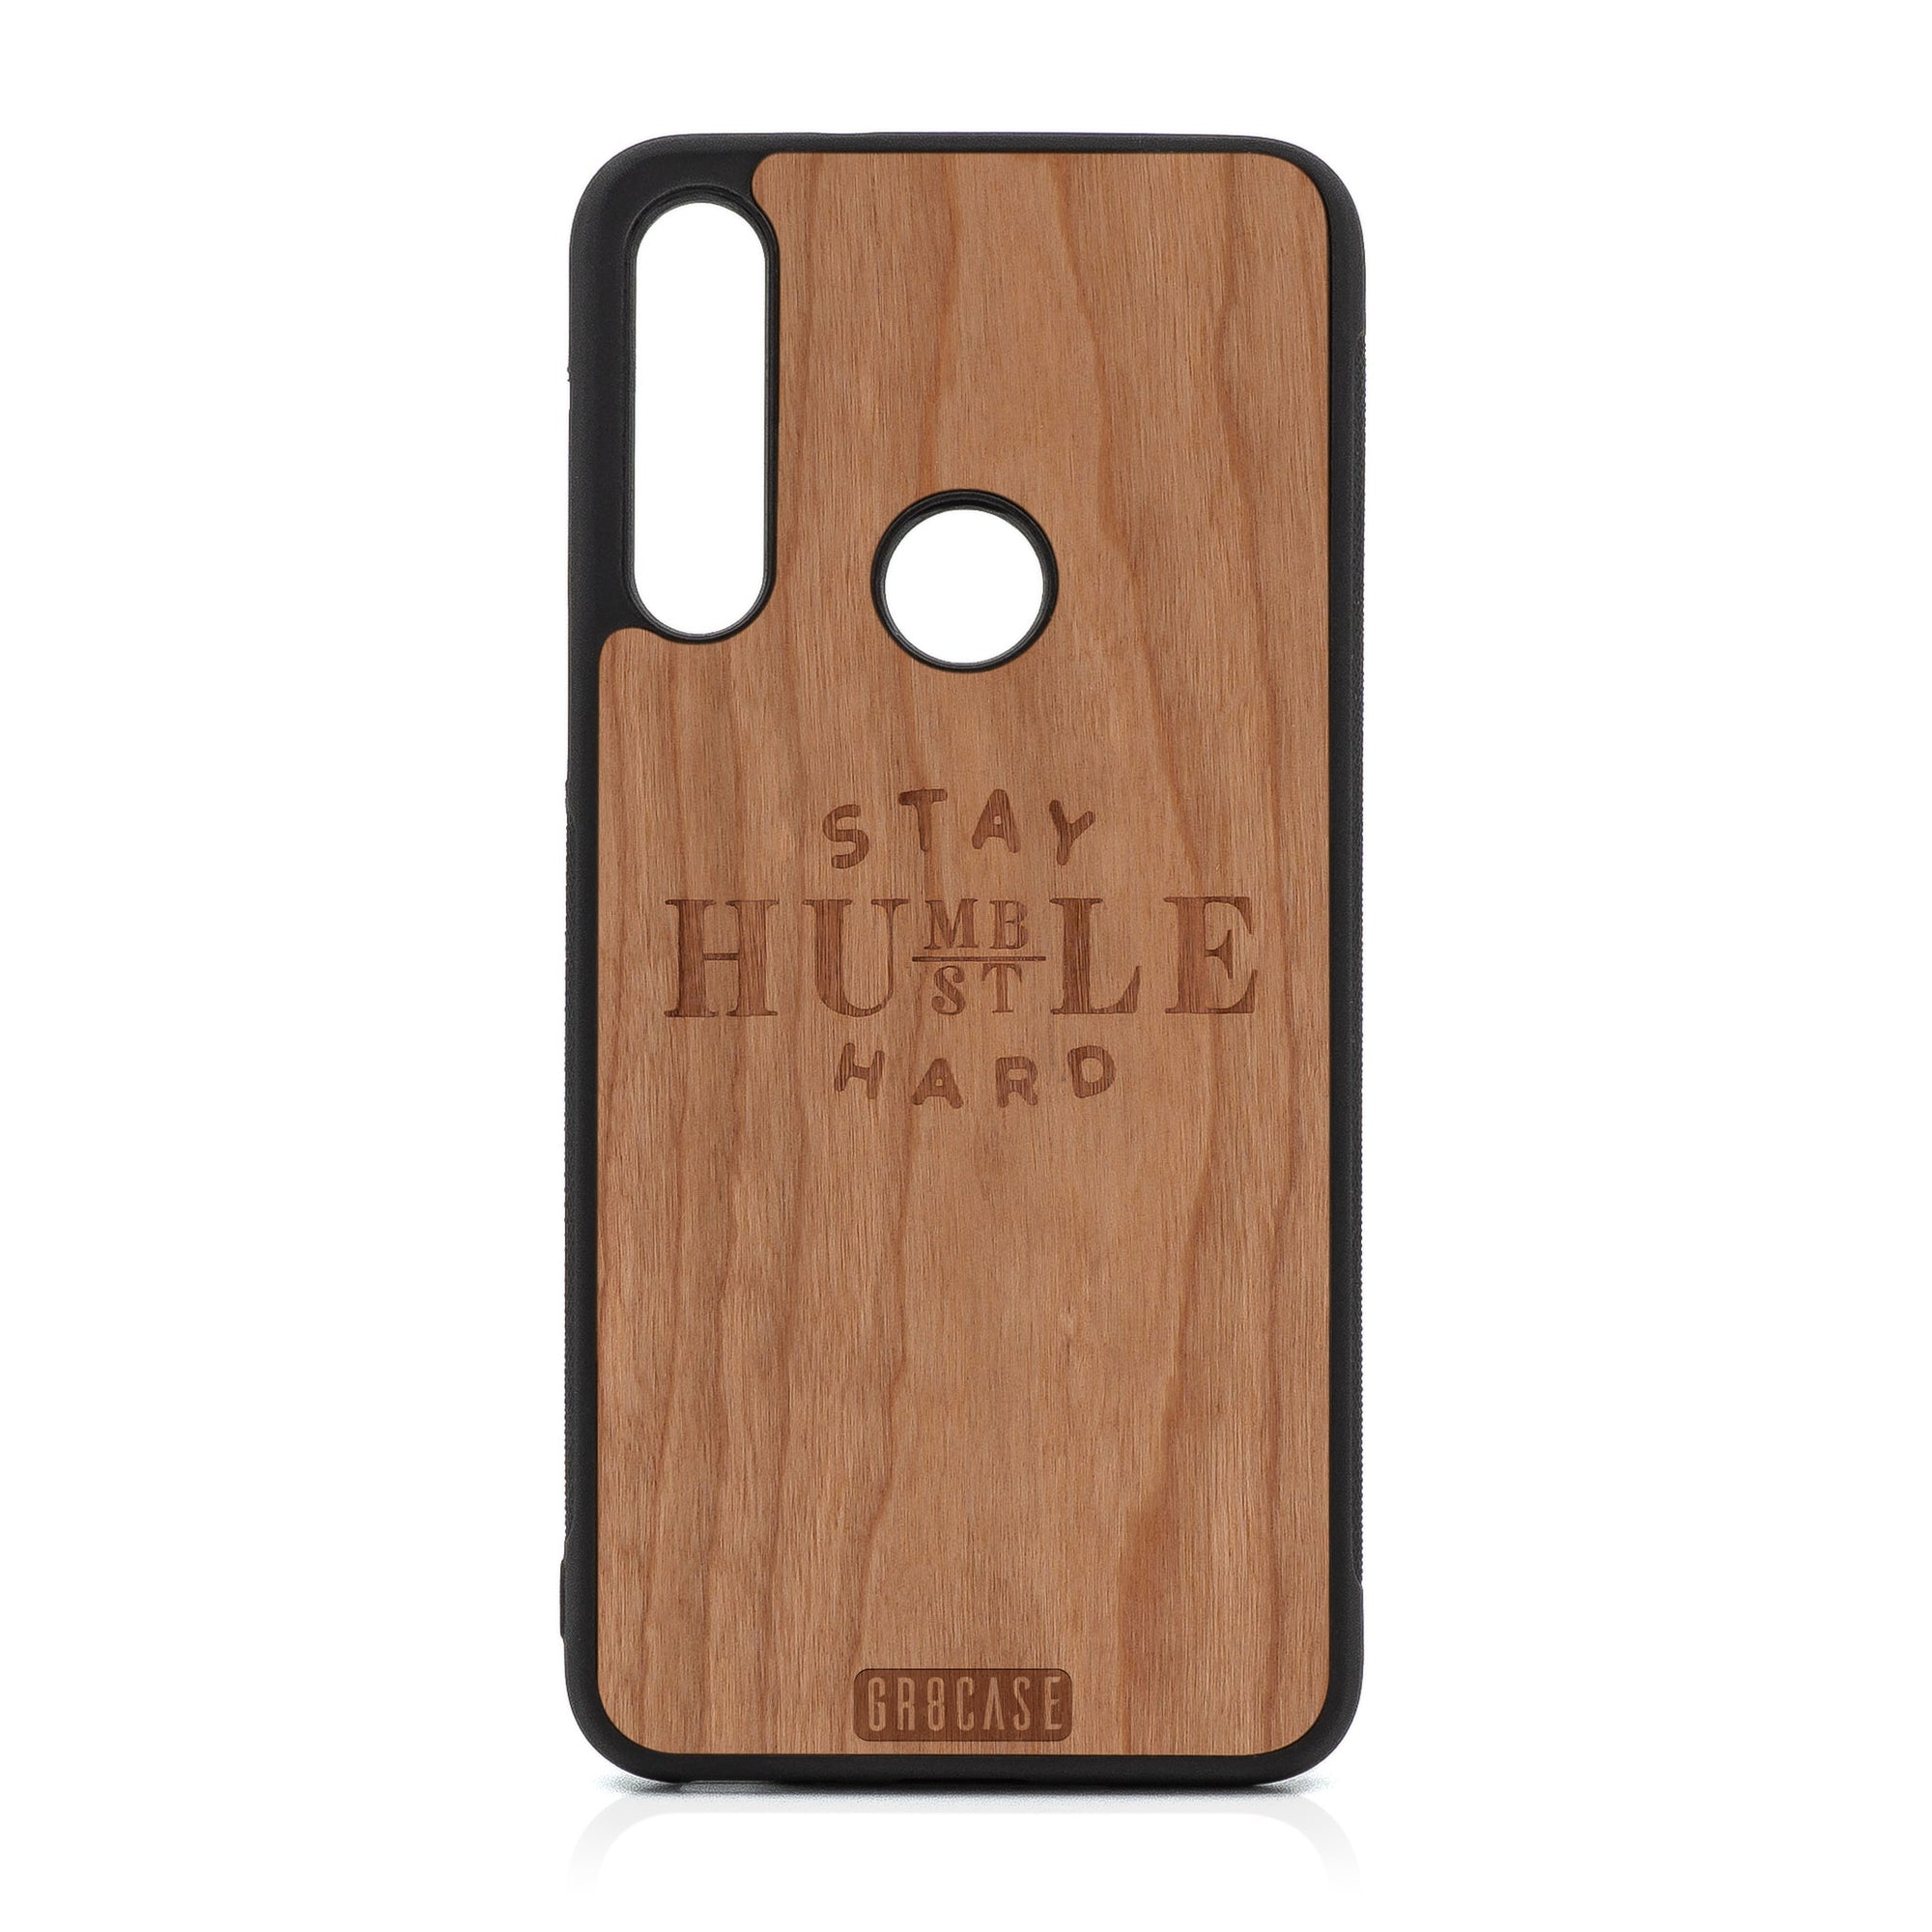 Stay Humble Hustle Hard Design Wood Case For Moto G Fast